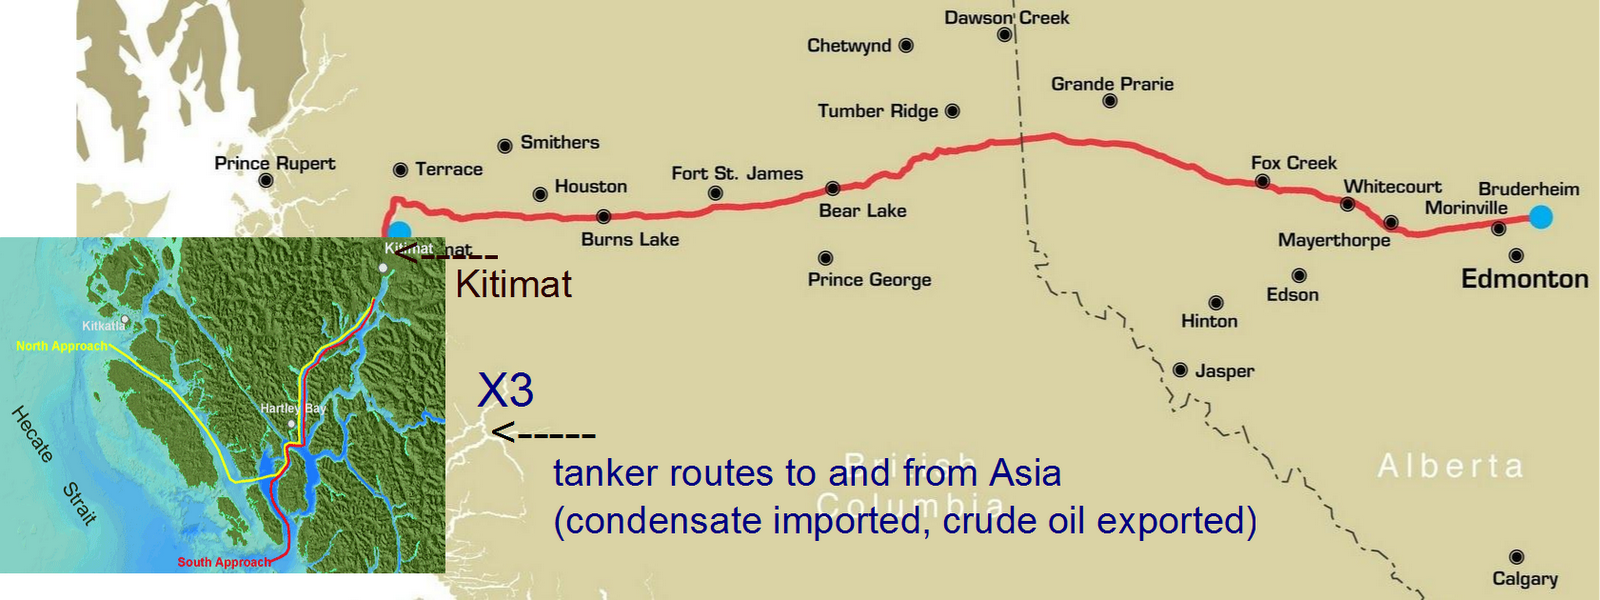 Kitimat British Columbia Northern Gateway Pipelines tanker route China oil exports crude Enbridge Edmonton Natural Gas Condensate imports